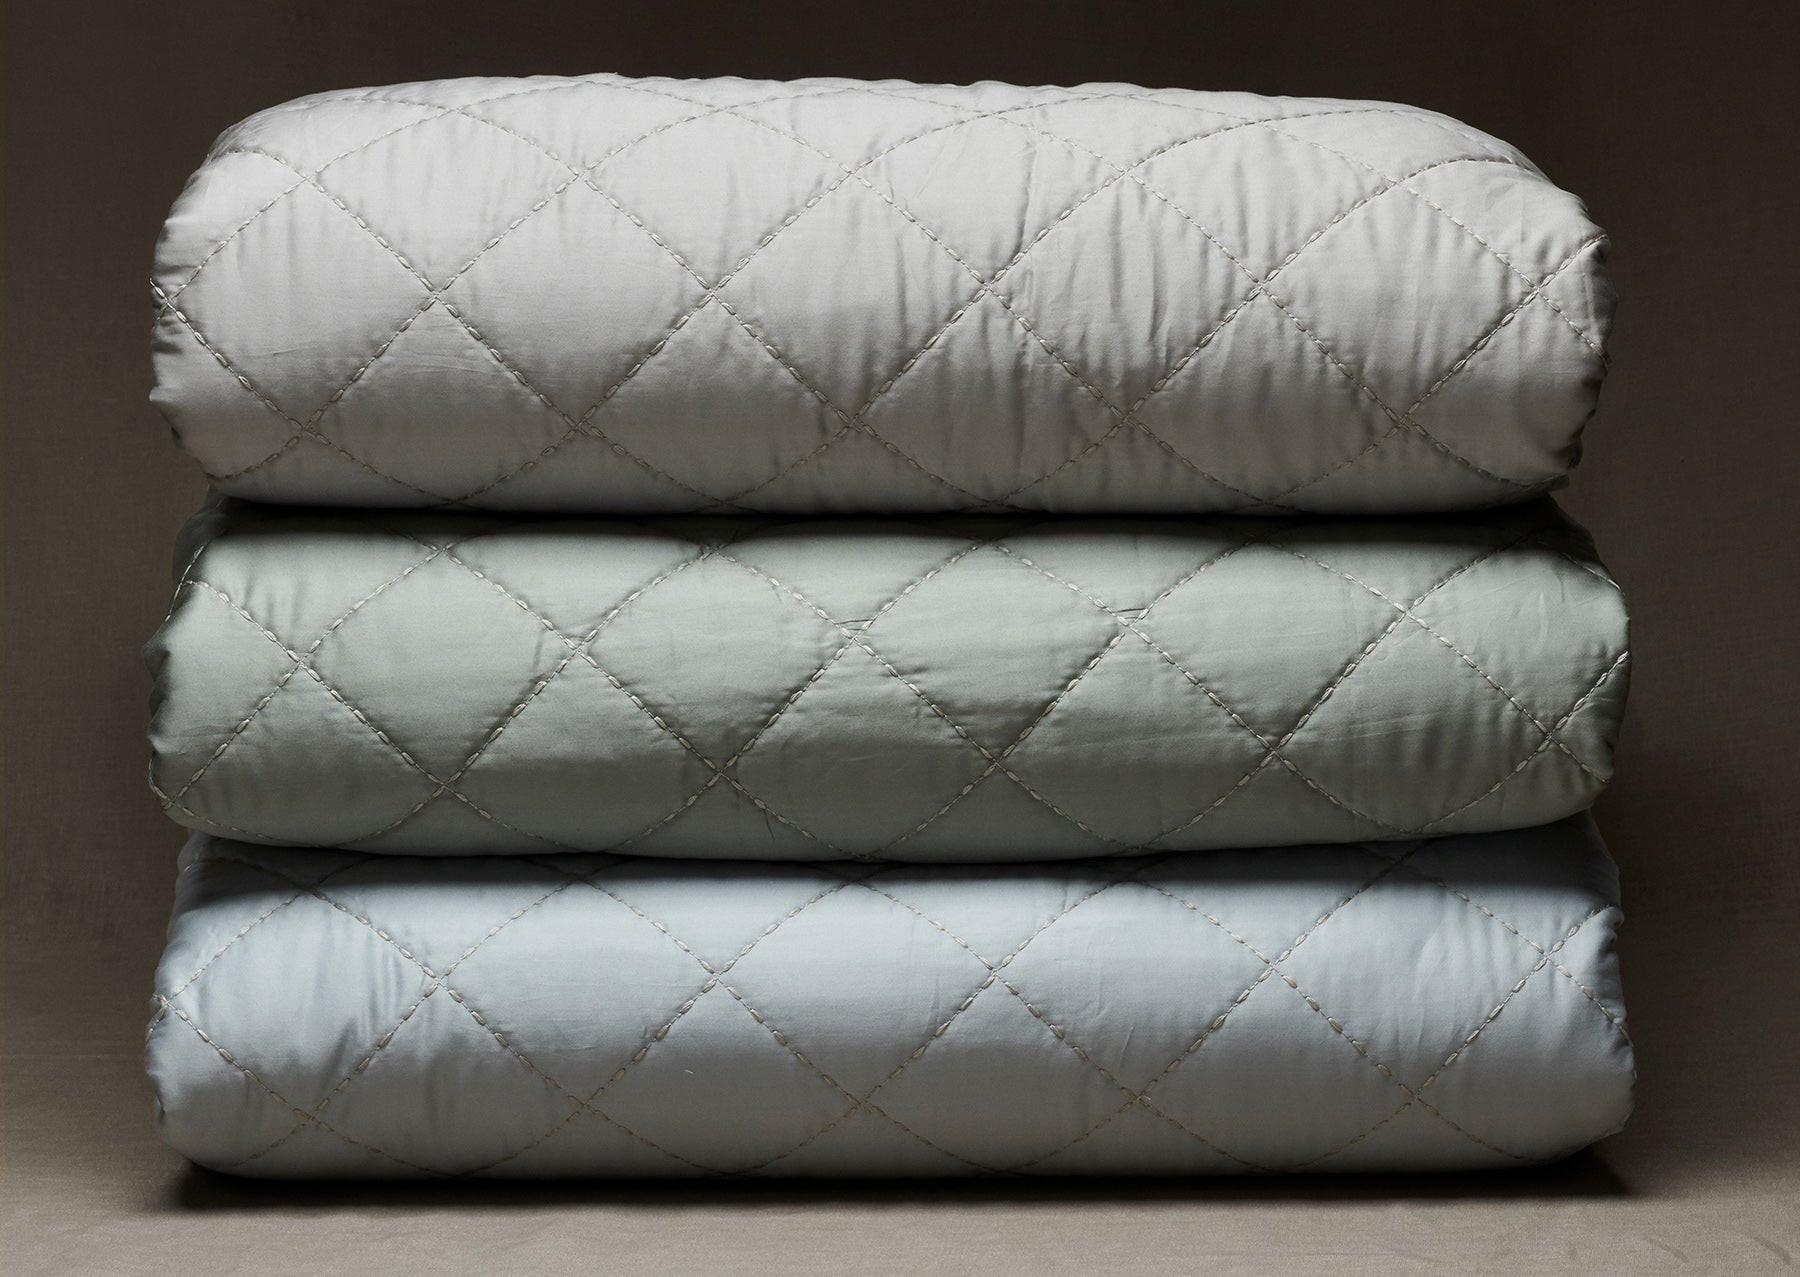 Quilted bedspread and quilt Pergamon ricamato rombi